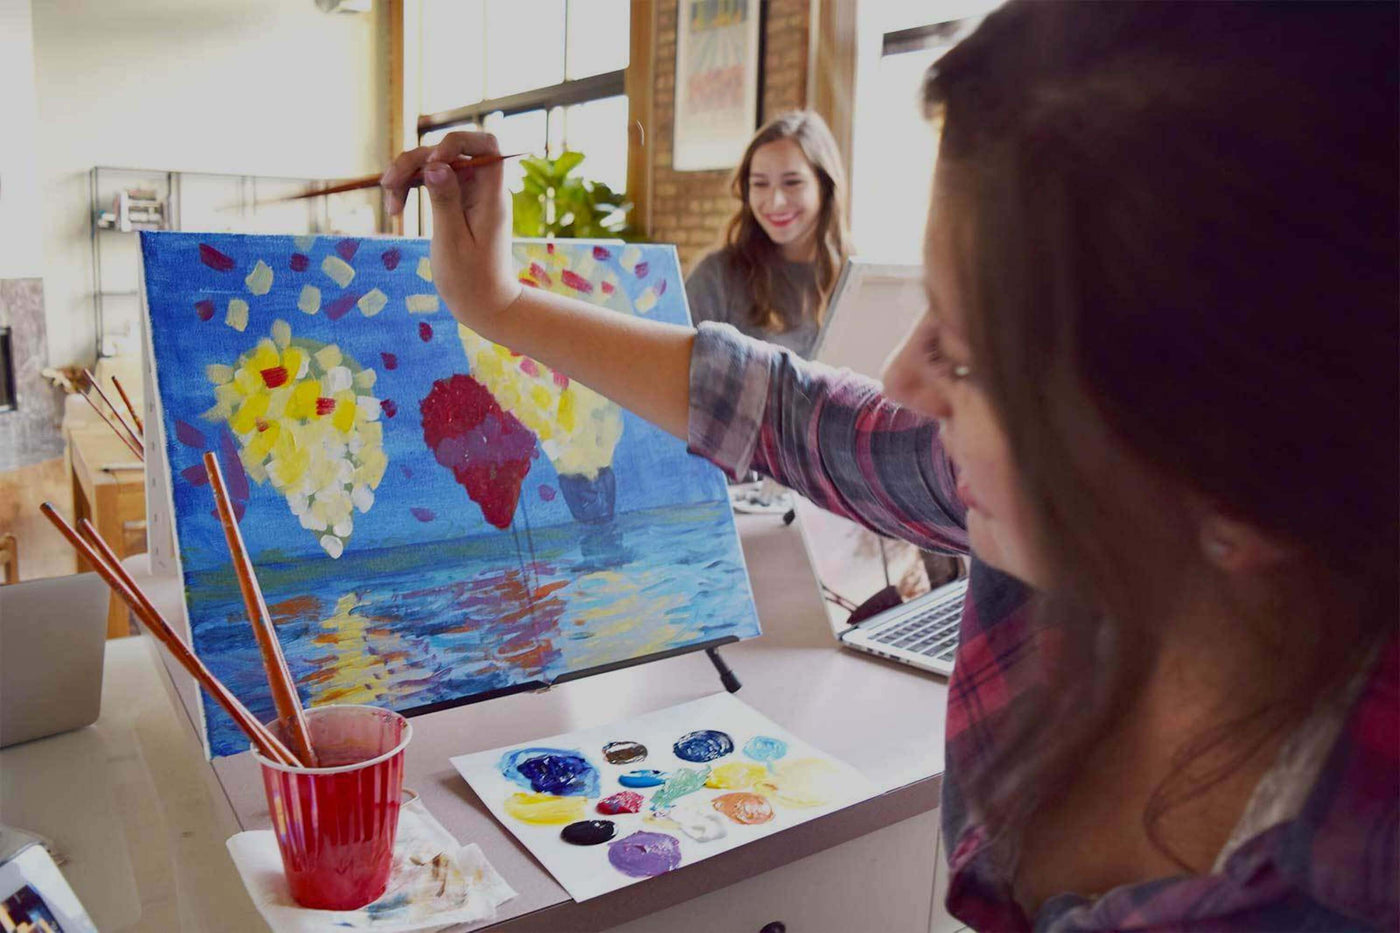 3 Simple, Mess-Free Ways to Paint with Kids